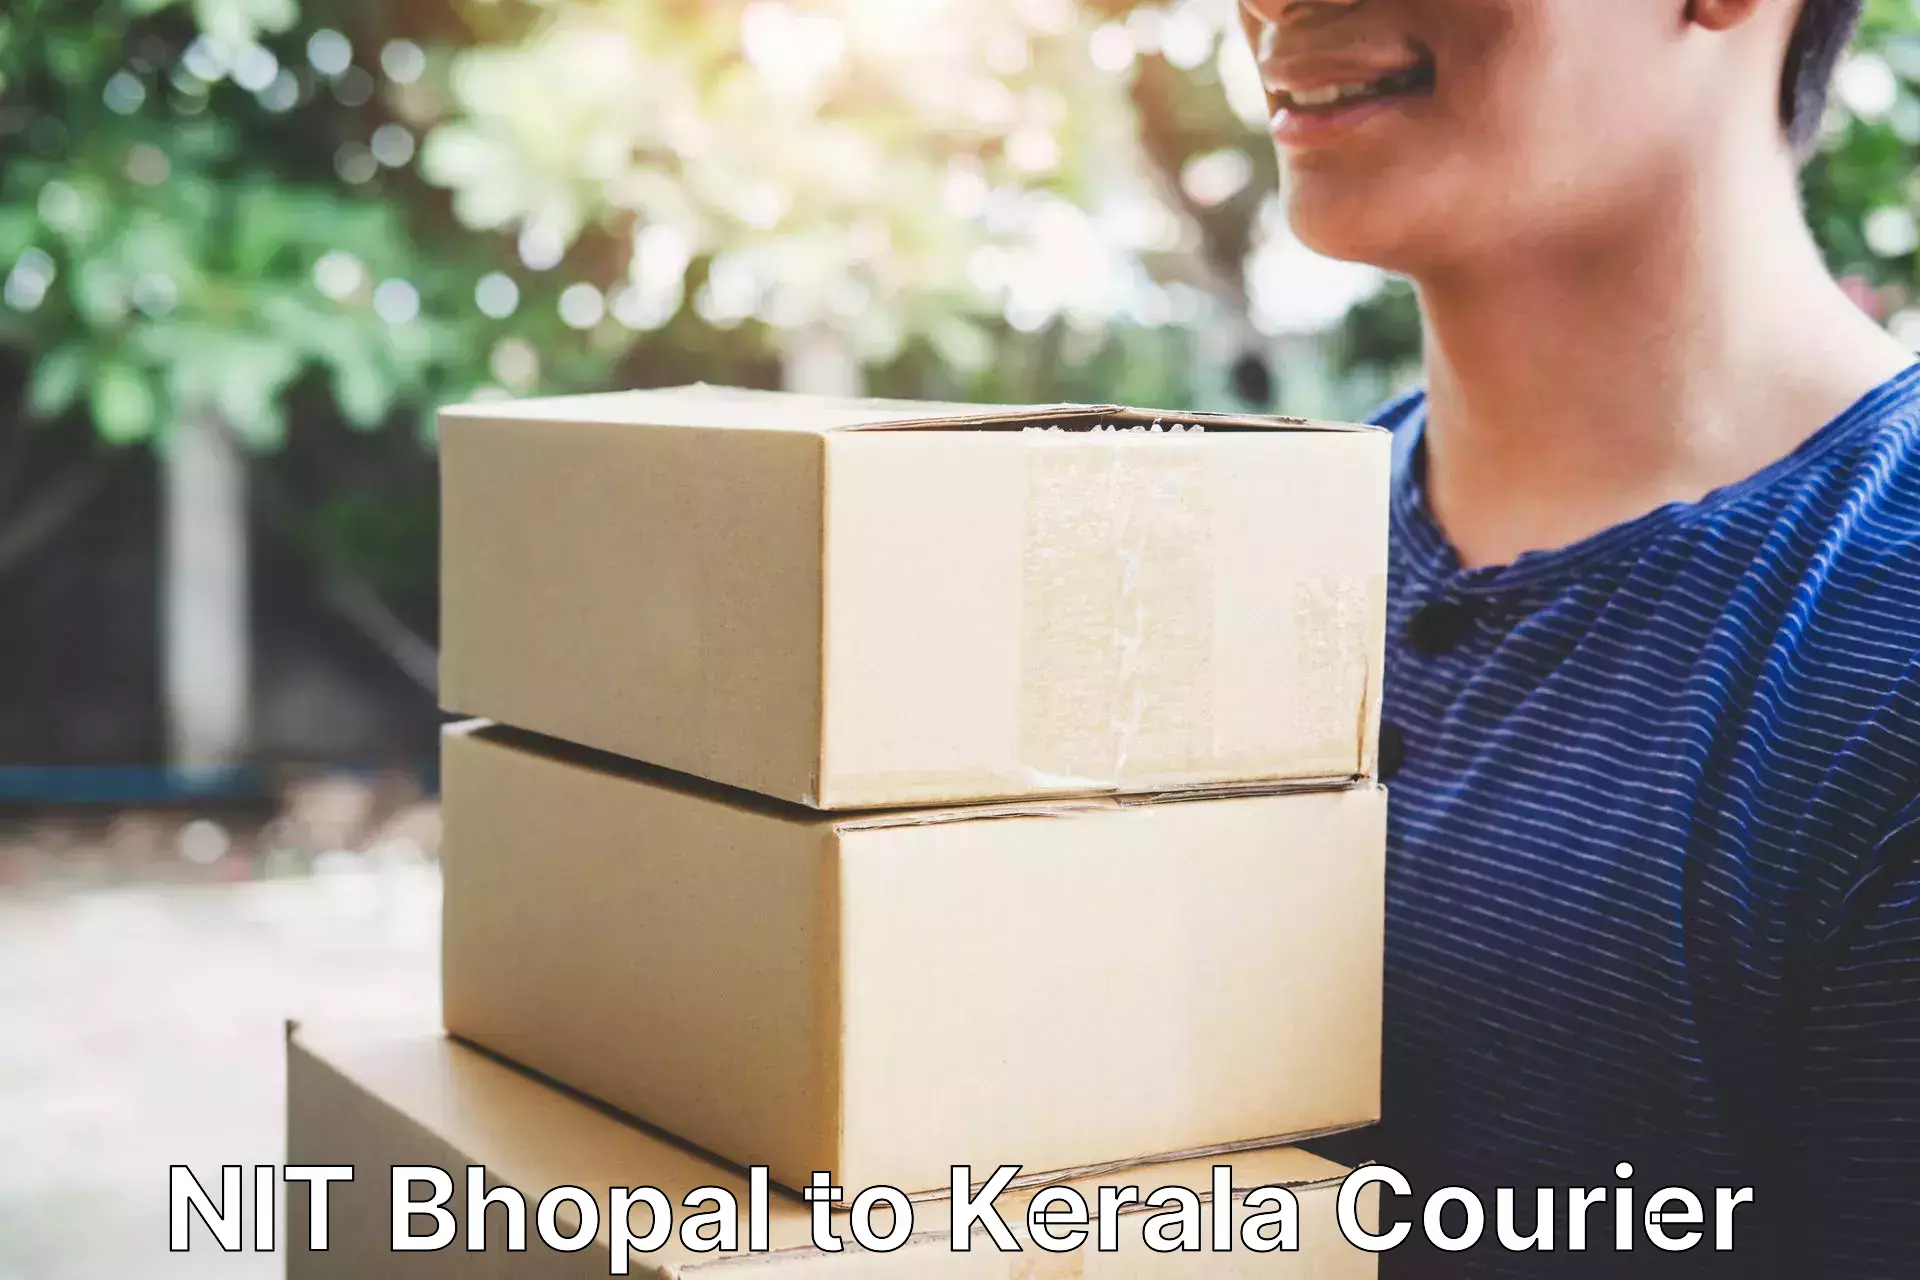 Express mail solutions NIT Bhopal to Kerala